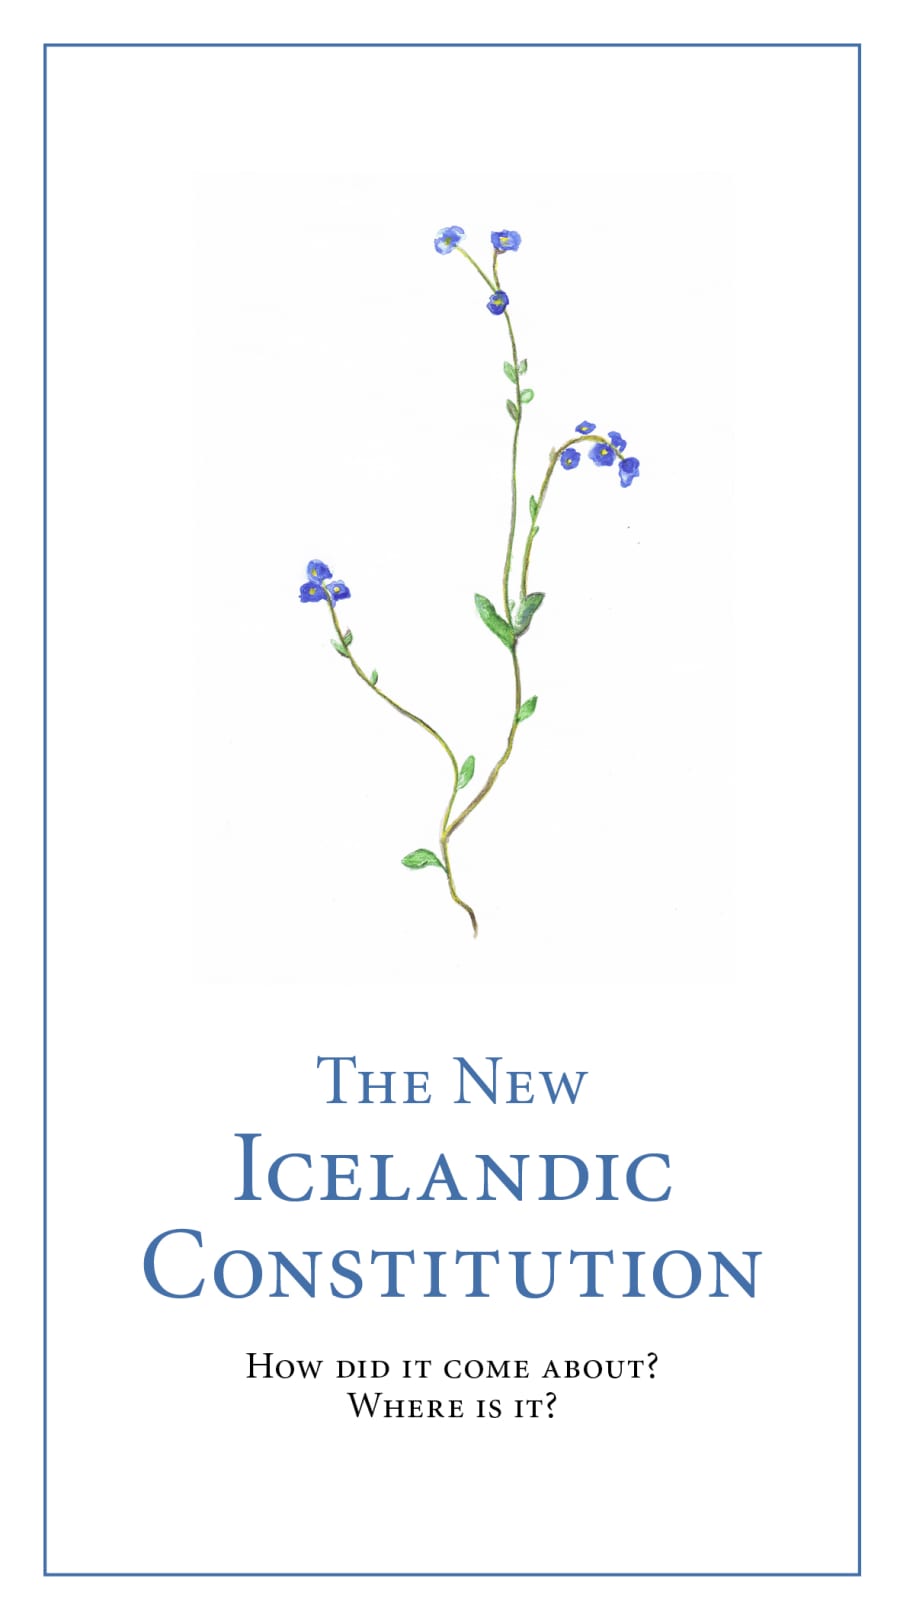 The New Icelandic Constitution: How did it come about? Where is it?